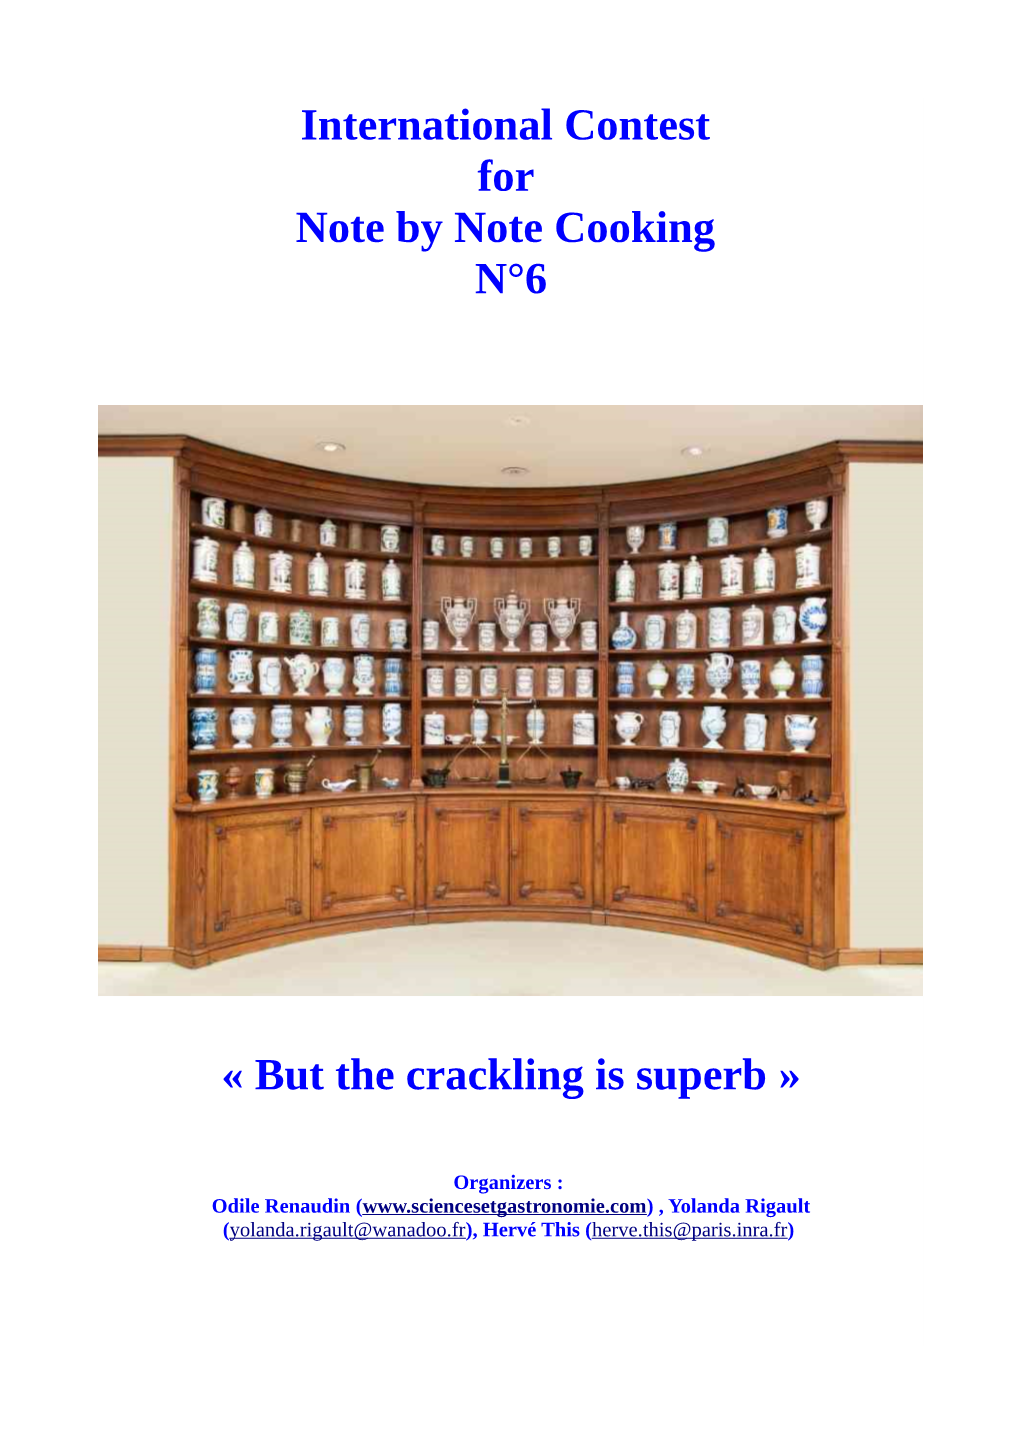 International Contest for Note by Note Cooking N°6 « But